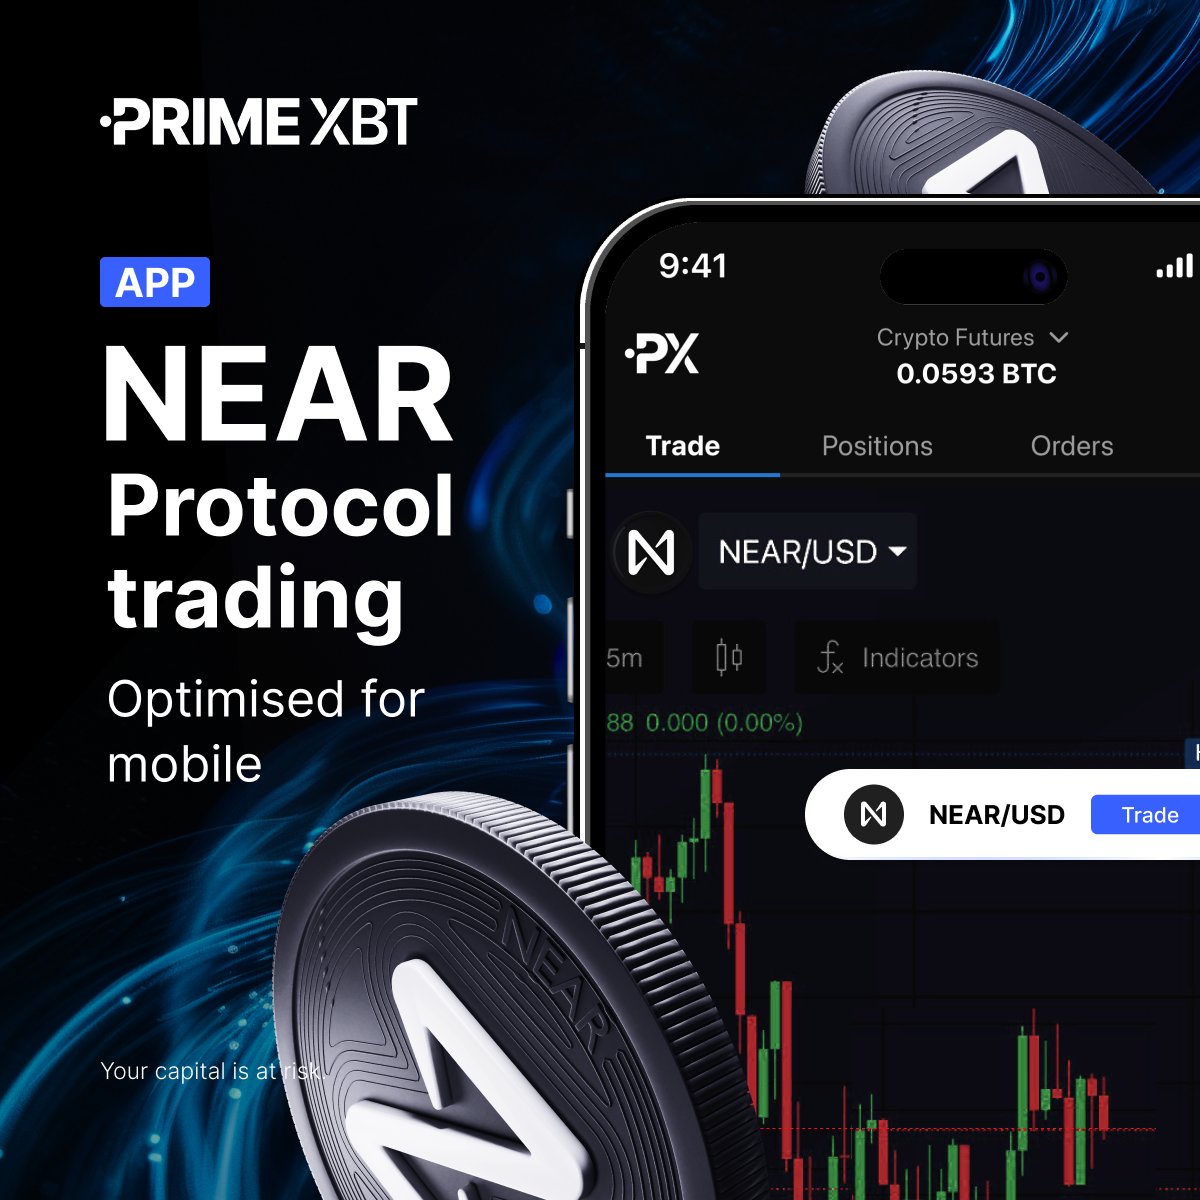 Enjoy the convenience of trading @NEARProtocol on our intuitive app.

Stay in sync with the #crypto world at home or on the move.

Download now:
📲 Android: eng.primexbt.com/app
📲 iOS: eng.primexbt.com/iosapp

#PrimeXBT #TheNewPrimeXBT